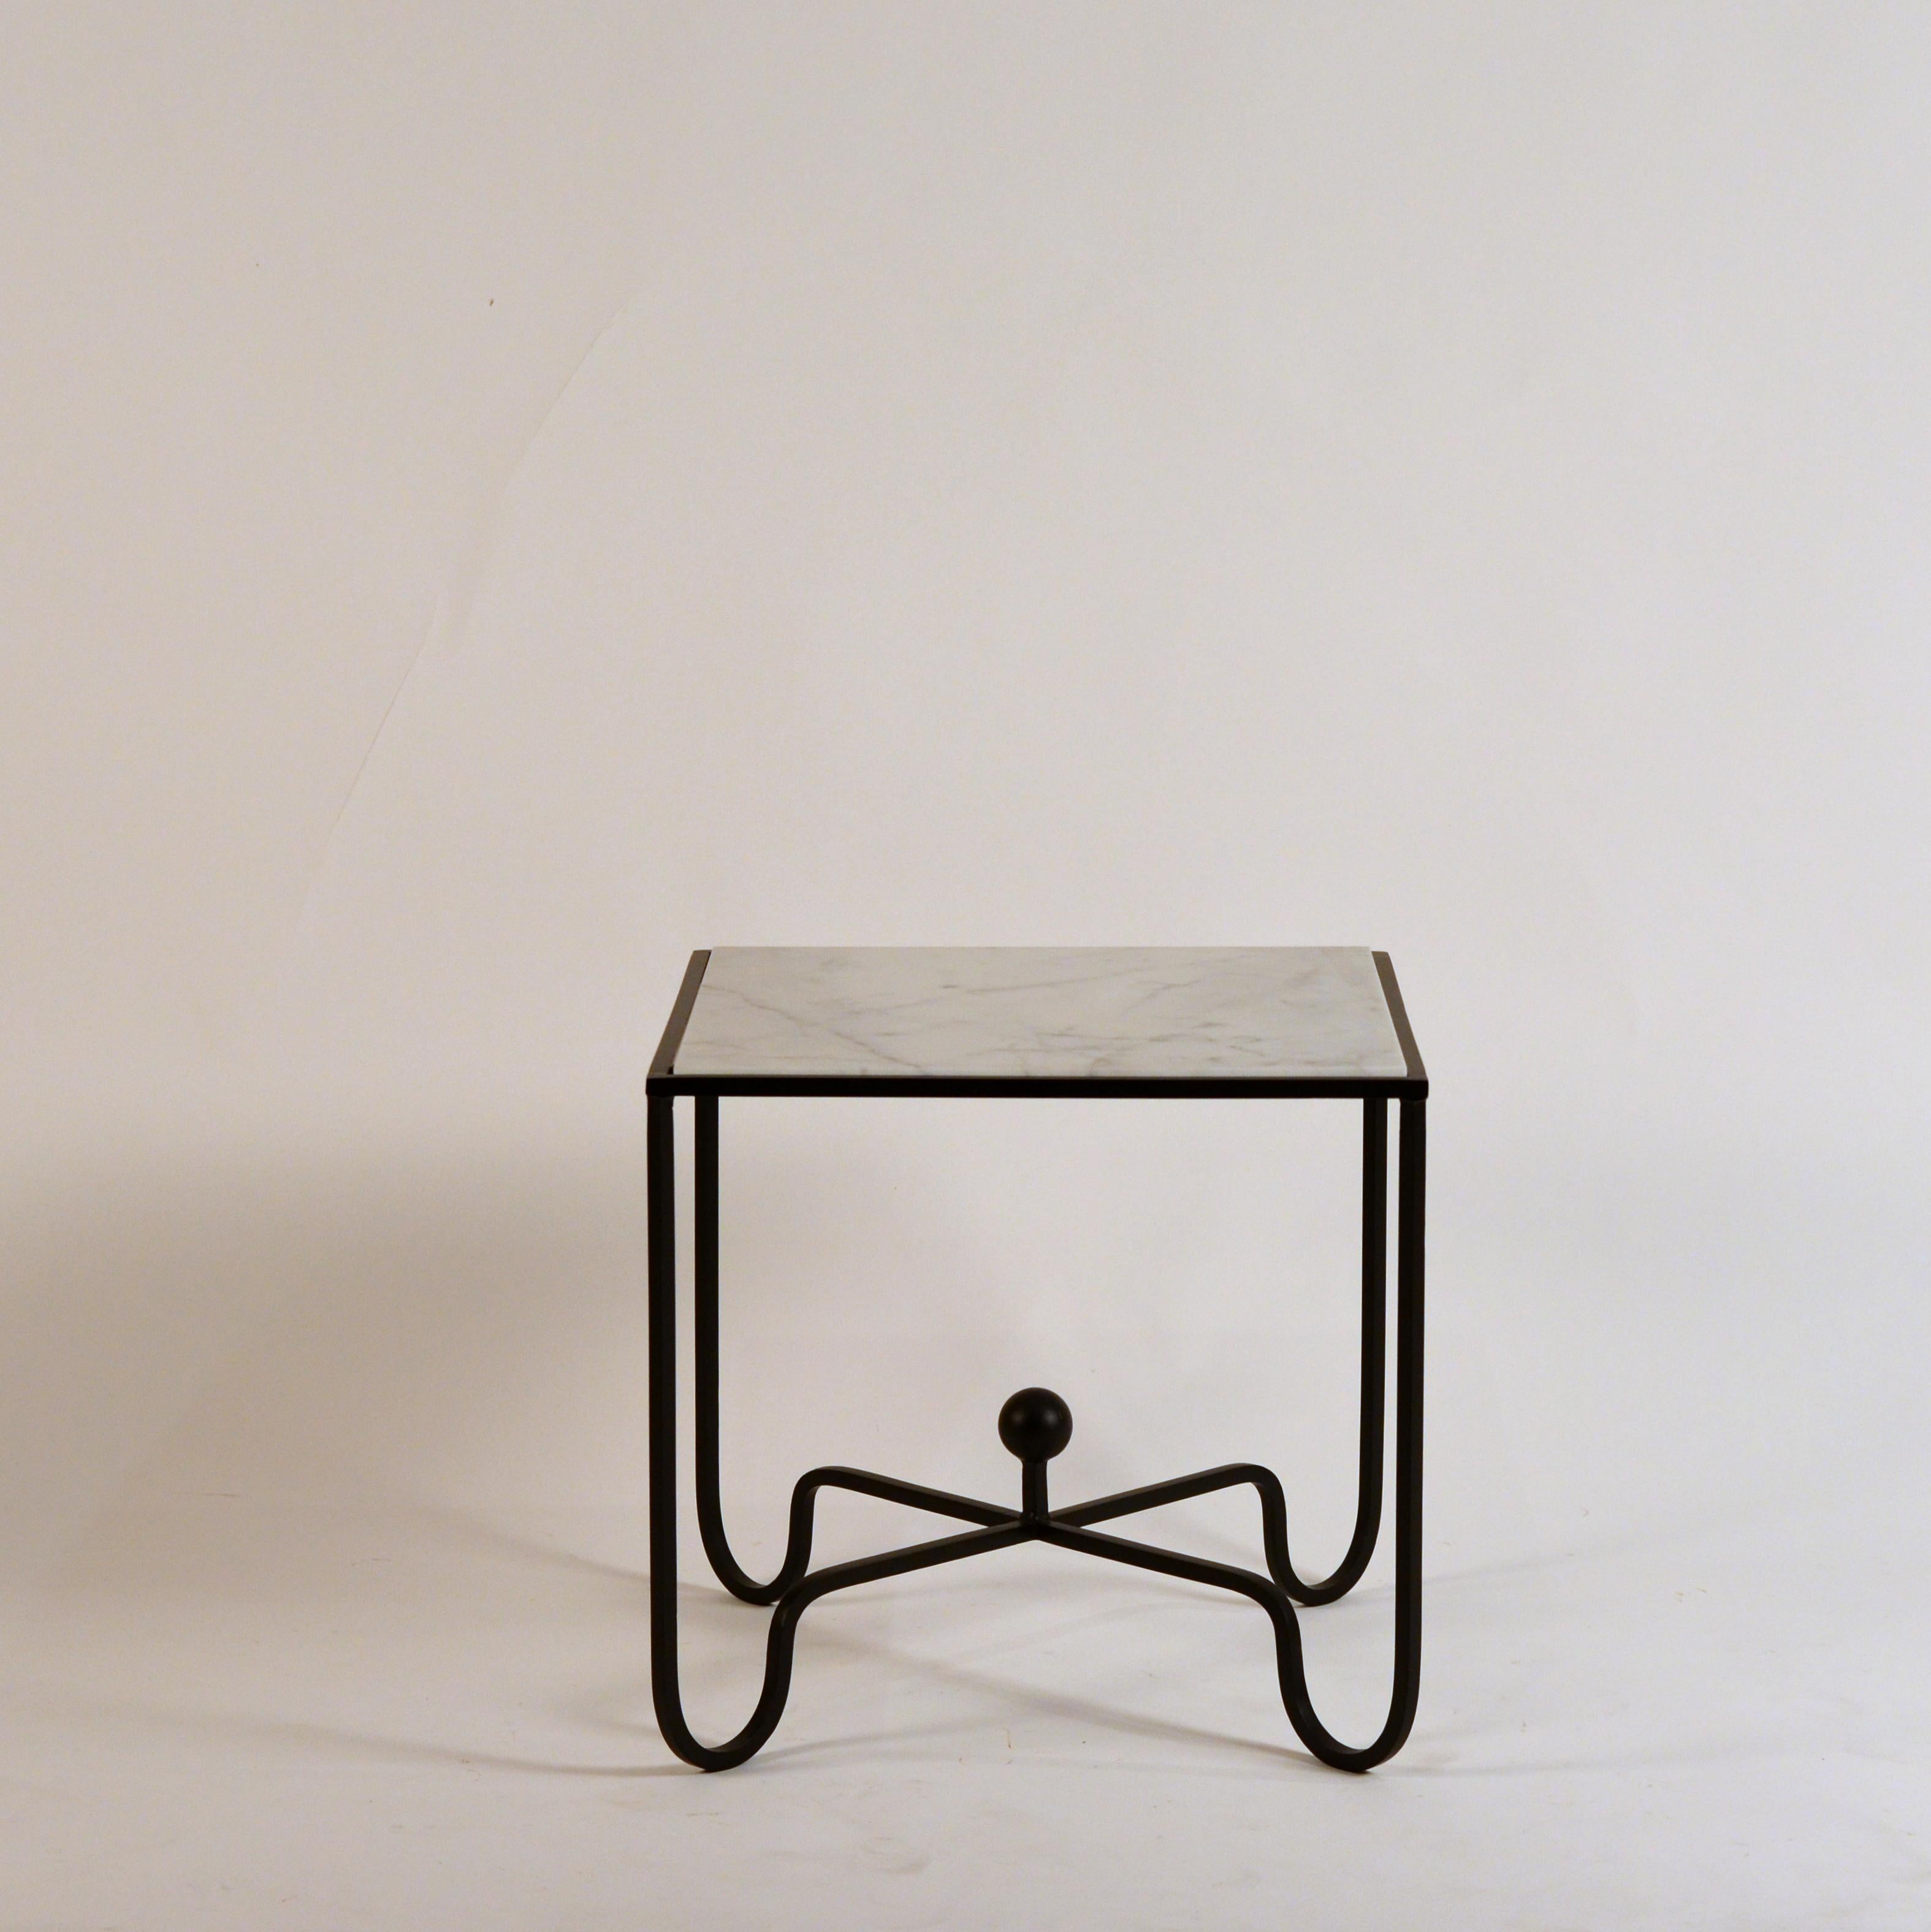 Chic pair of wrought Iron and marble 'Entretoise' side tables by Design Frères. Matte black wrought iron bases with honed white veined marble tops.